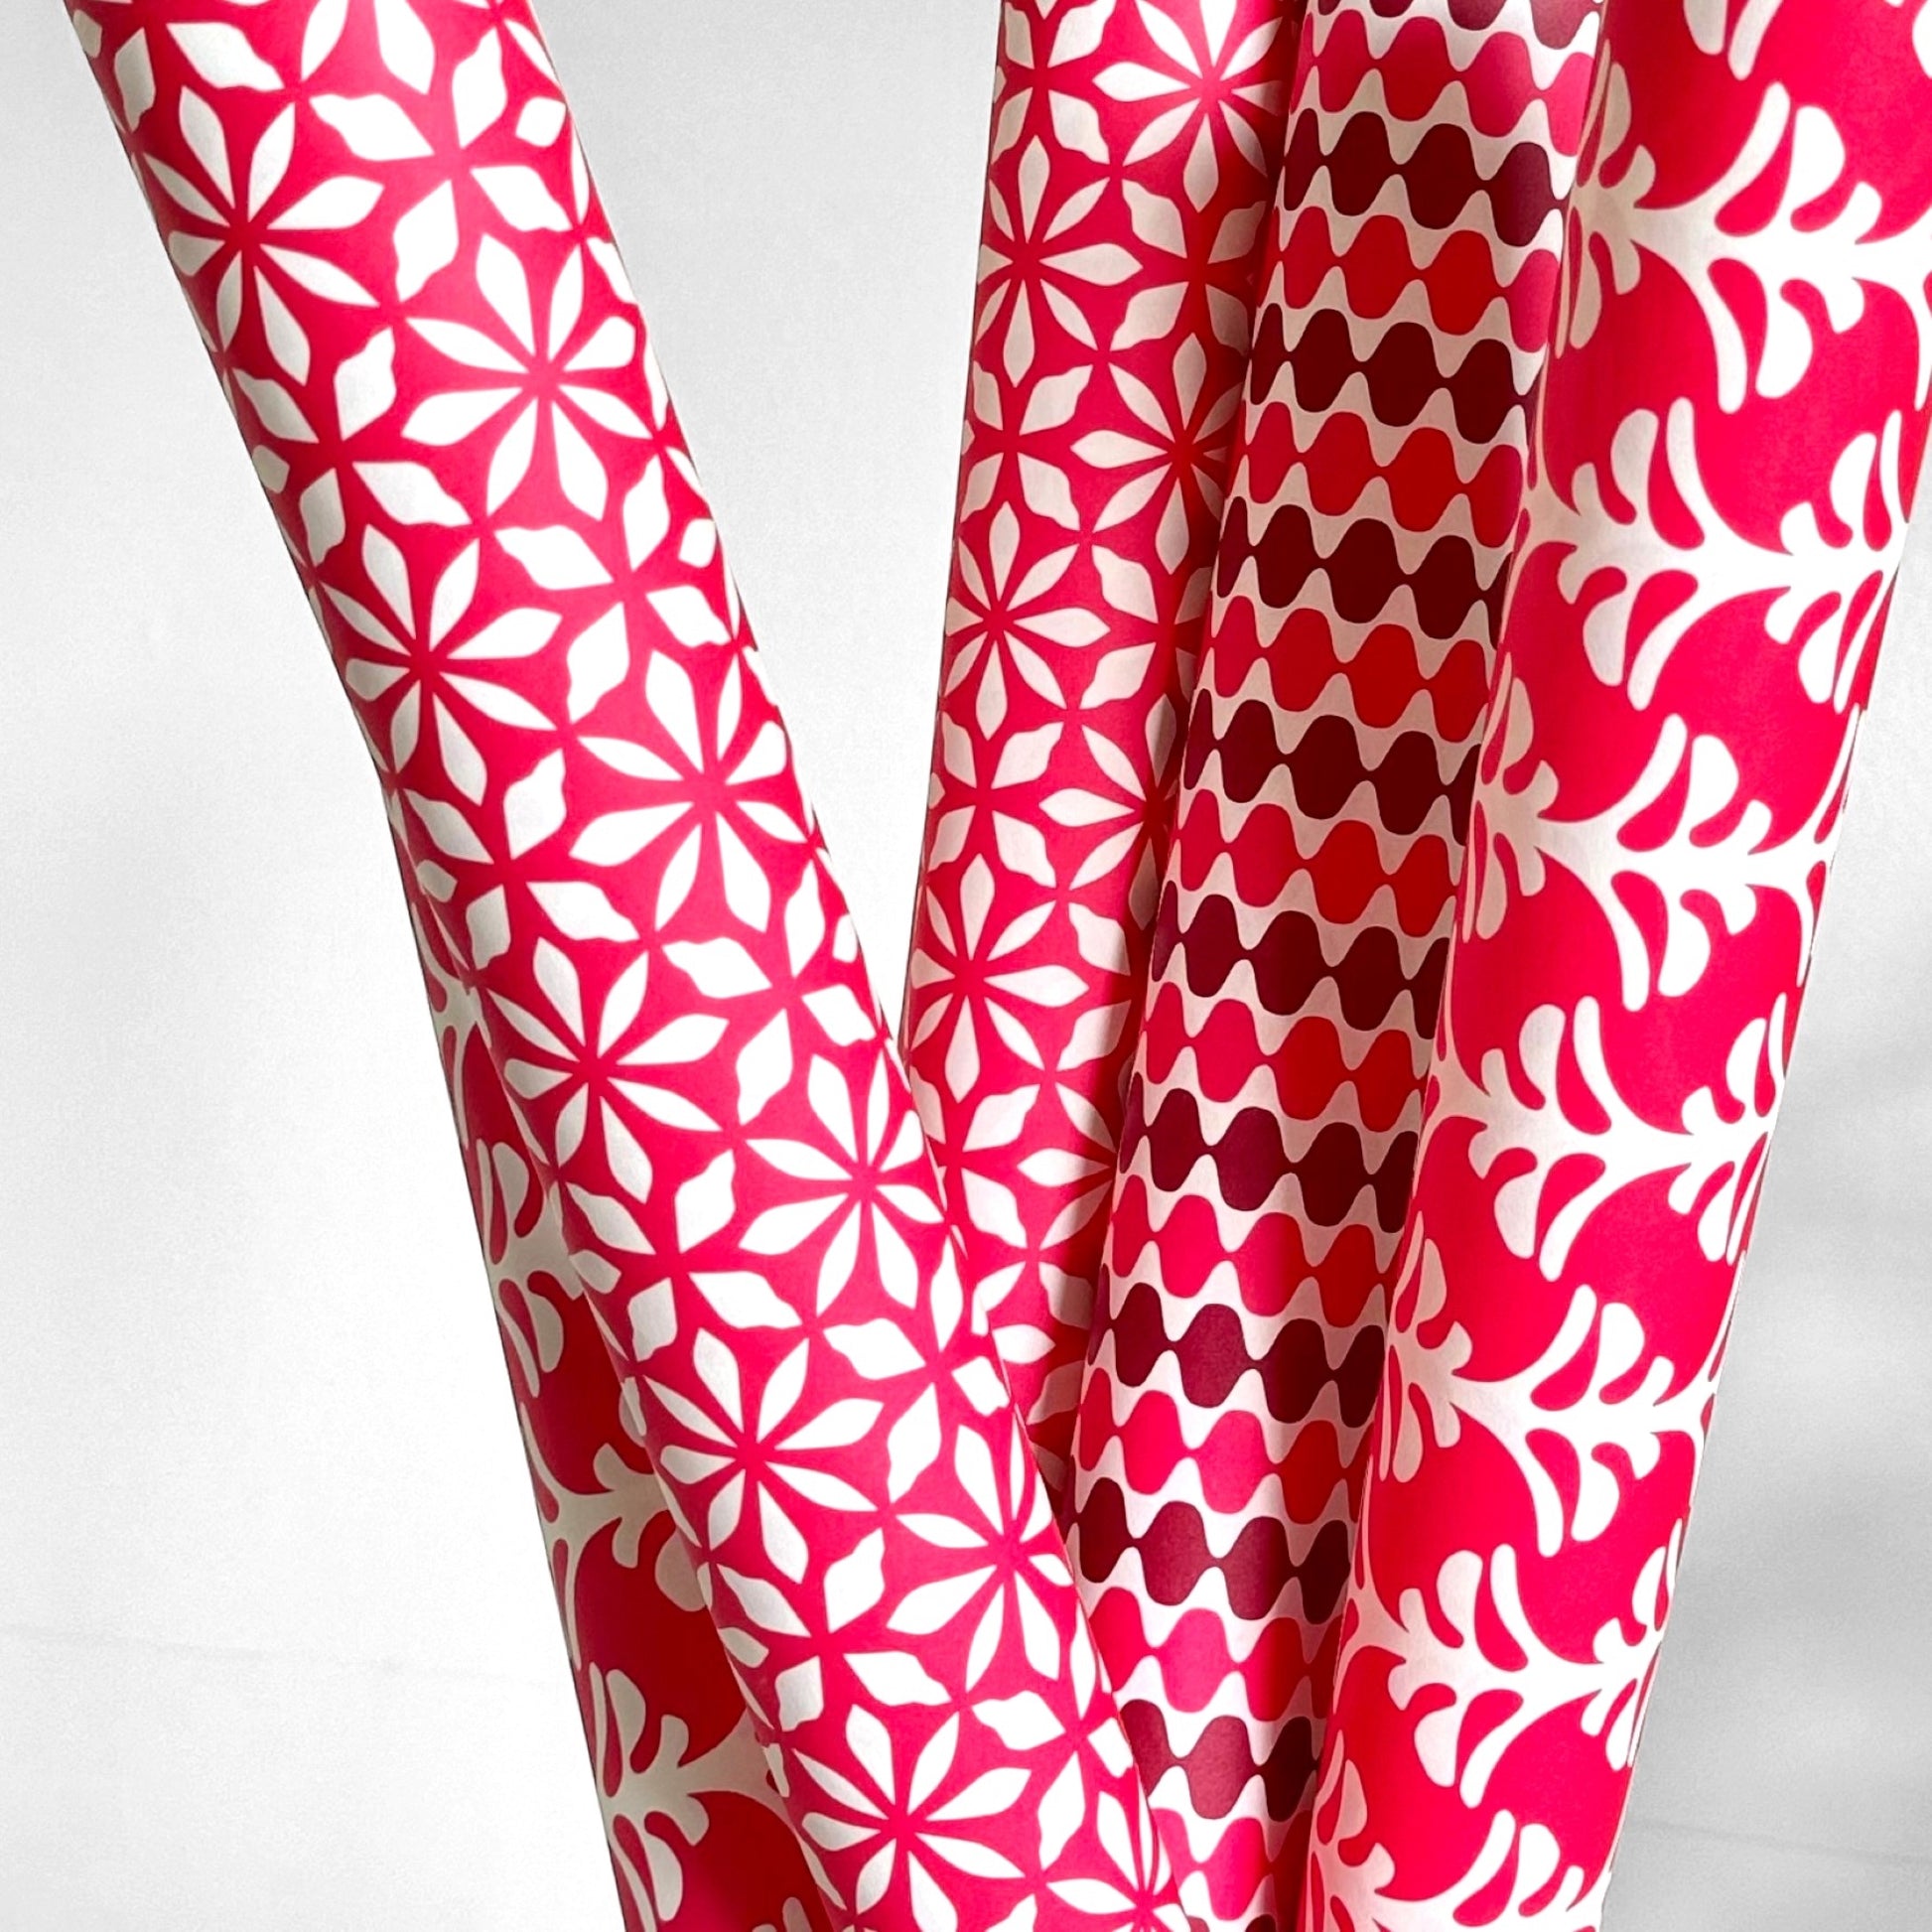 wrapping paper by Otto Editions with a cut-out palm design in white on a hibiscus pink background. Pictured rolled alongside other designs